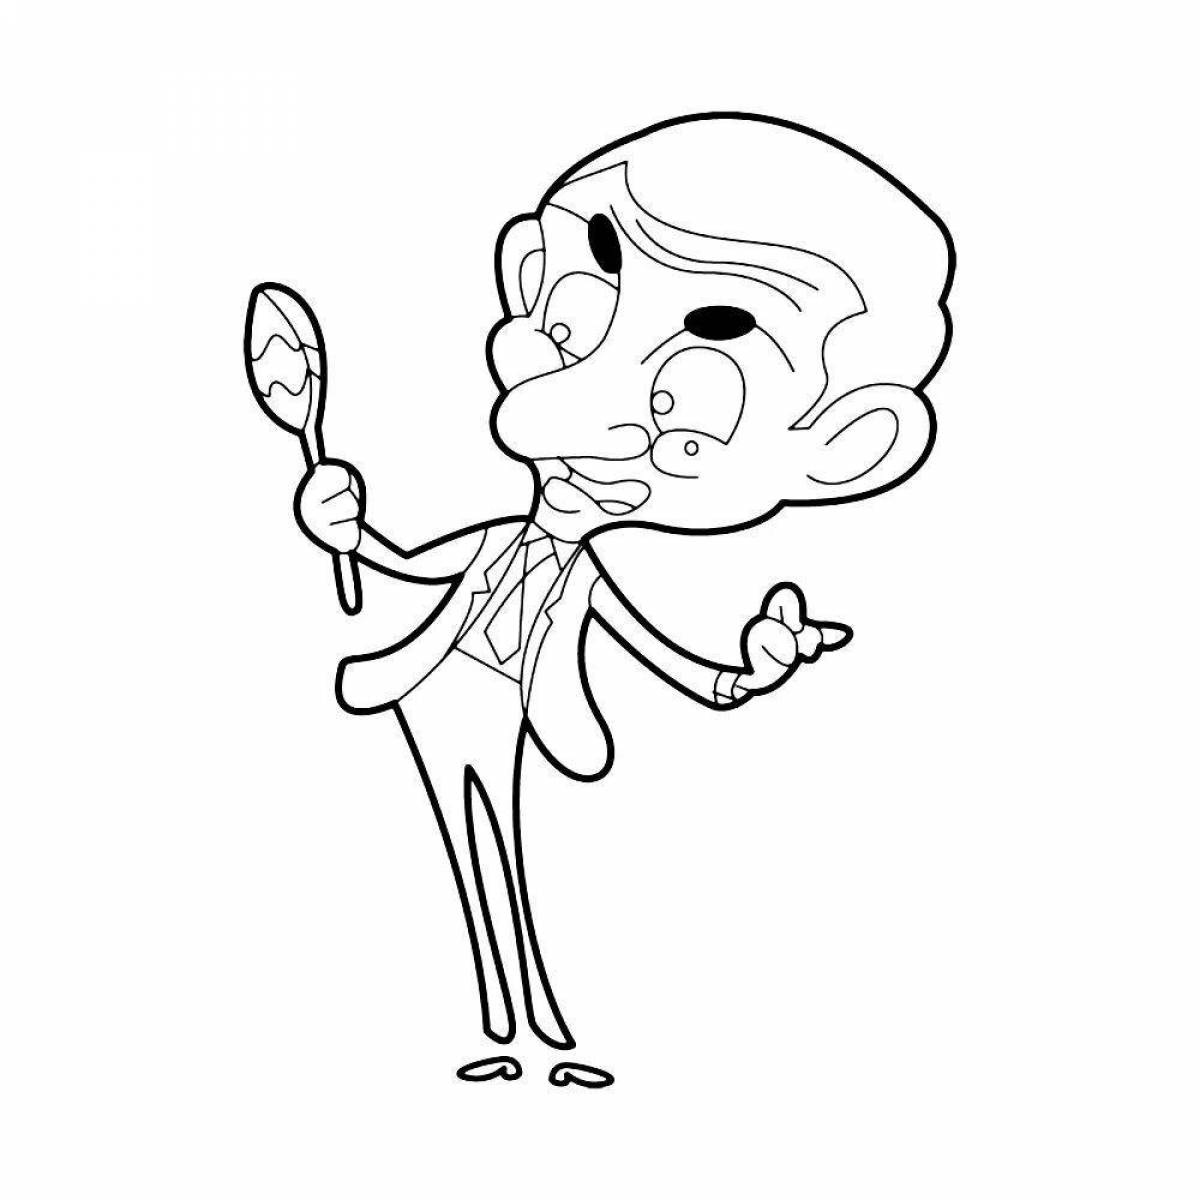 Coloring page irresistible mr bean